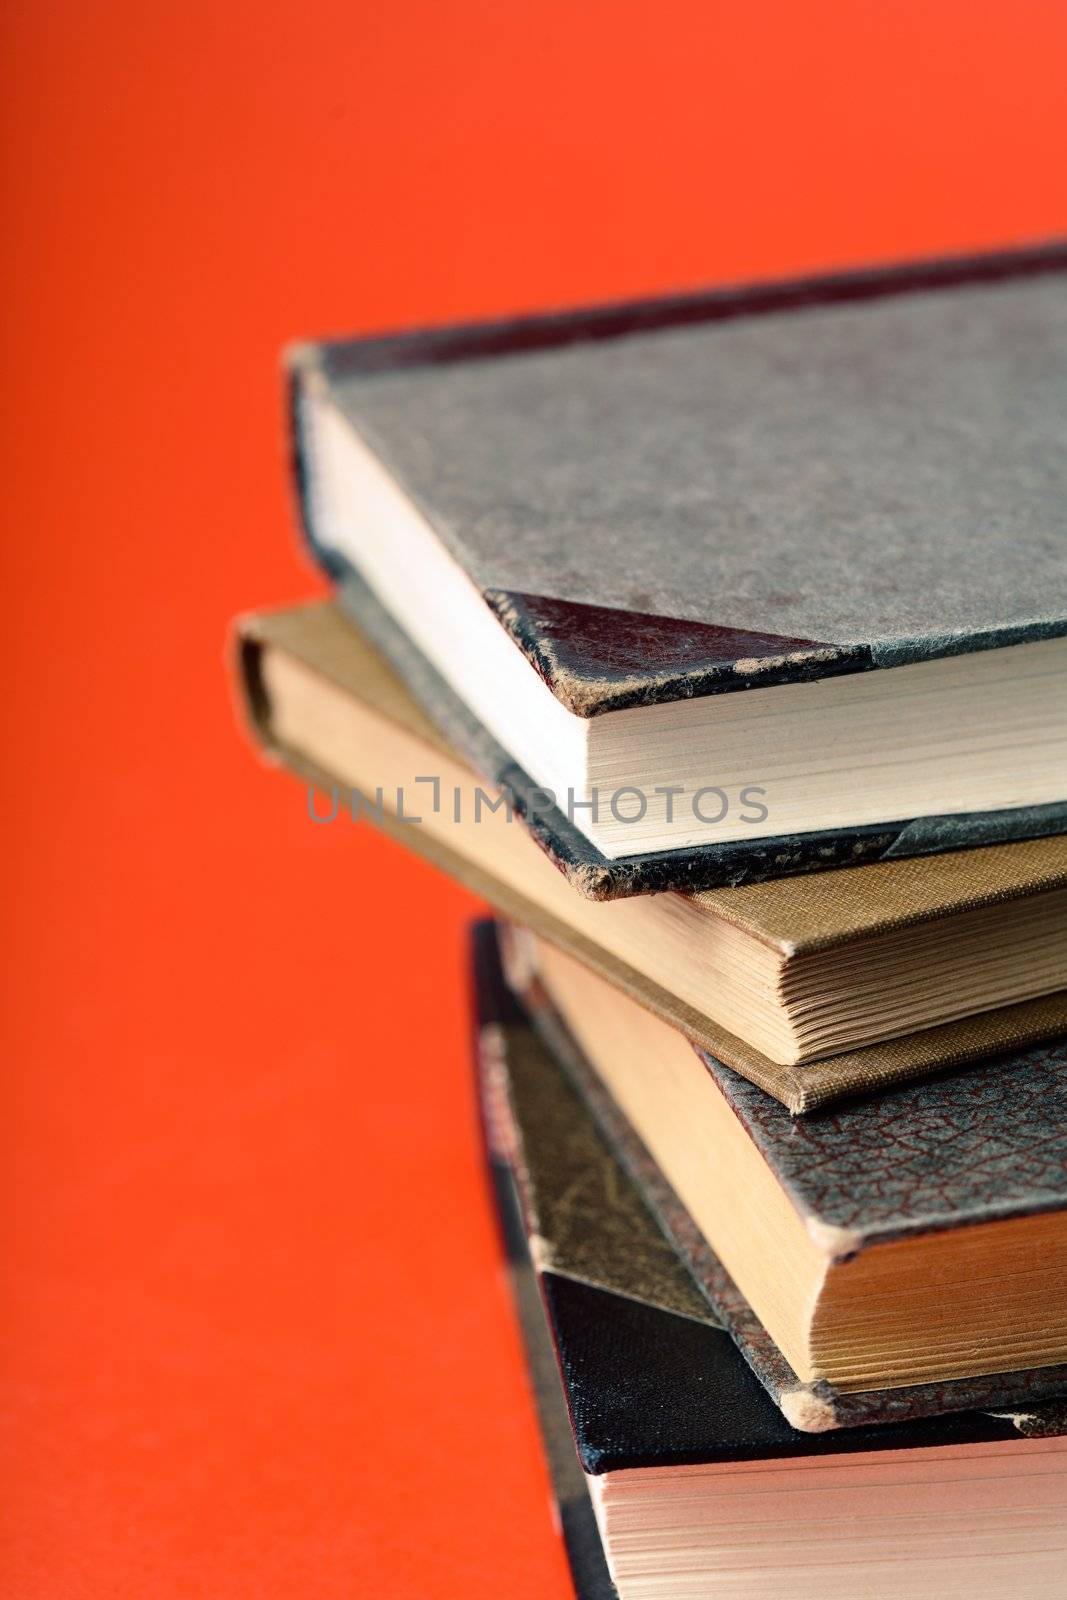 Pile of old books against a red background.